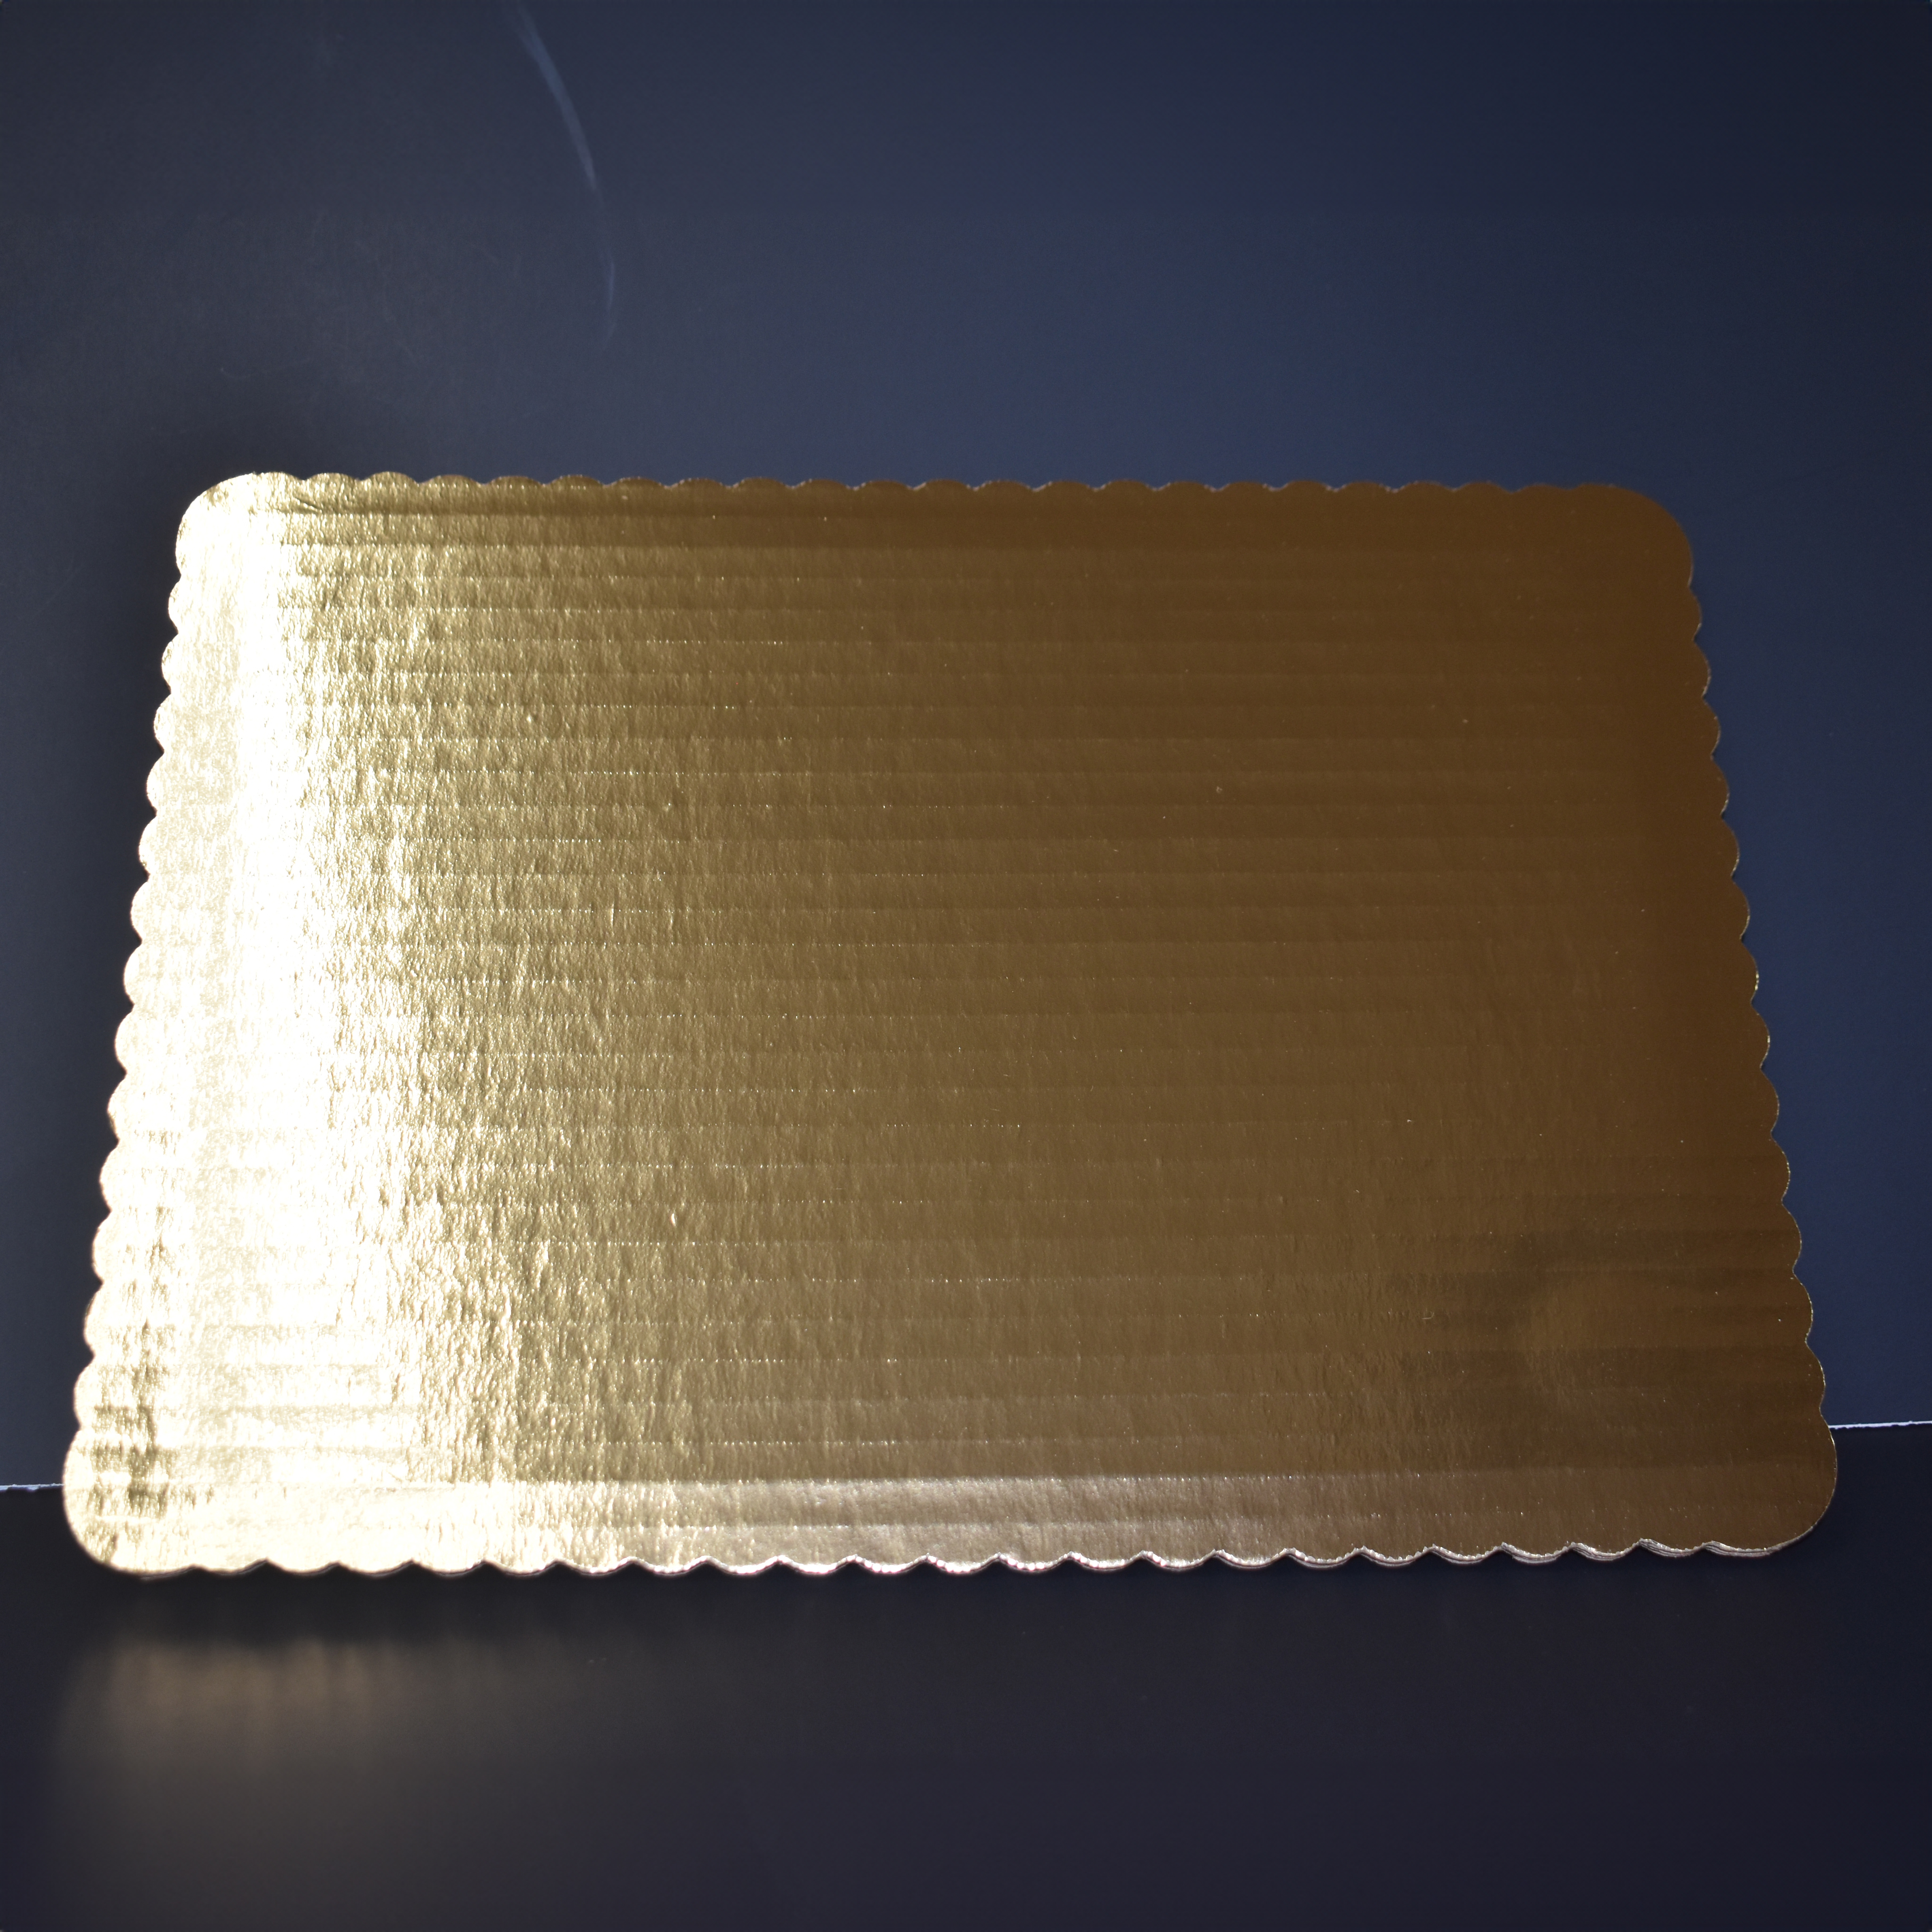 [1660] 14*10 1/4 Sheet Gold, 
Double Walled Pad
(50)